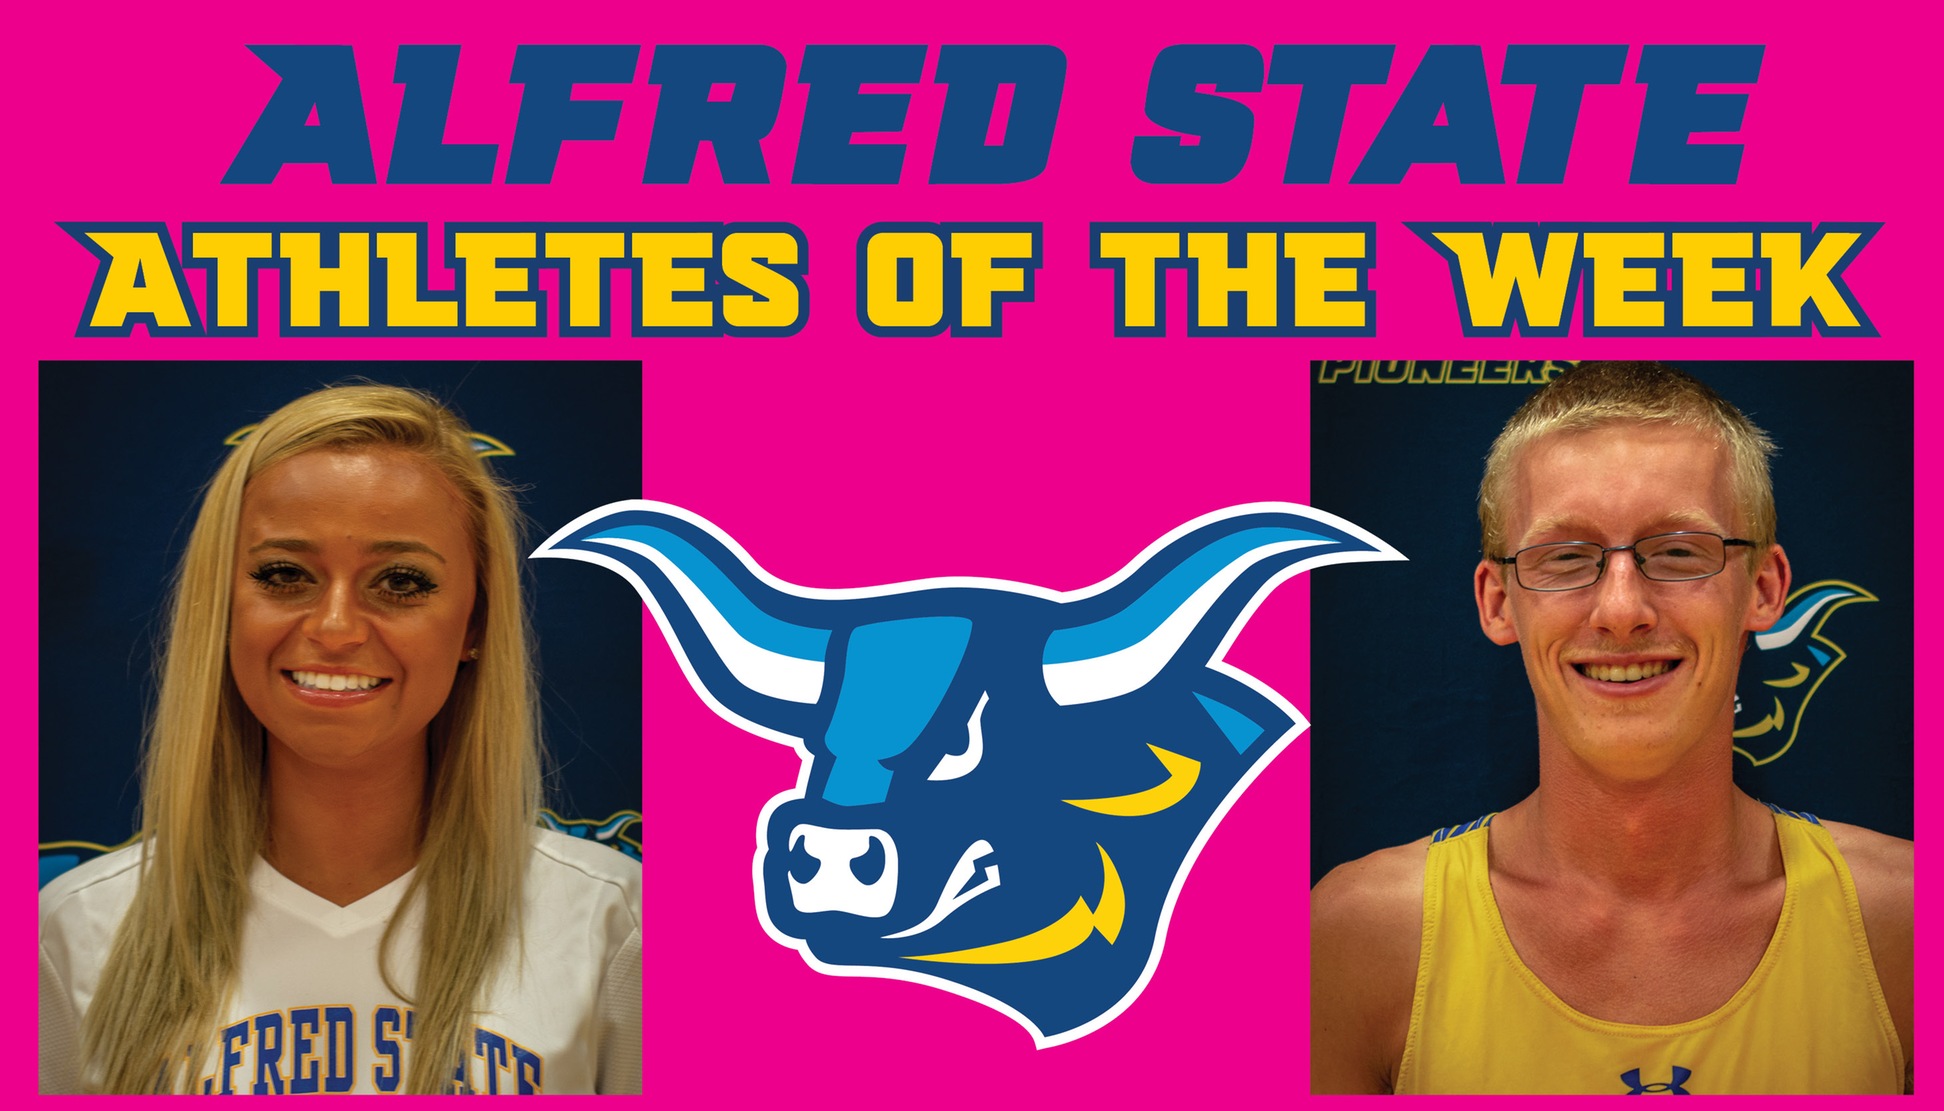 Michayla Salatel and Shawn Rutledge Named Athletes of the Week